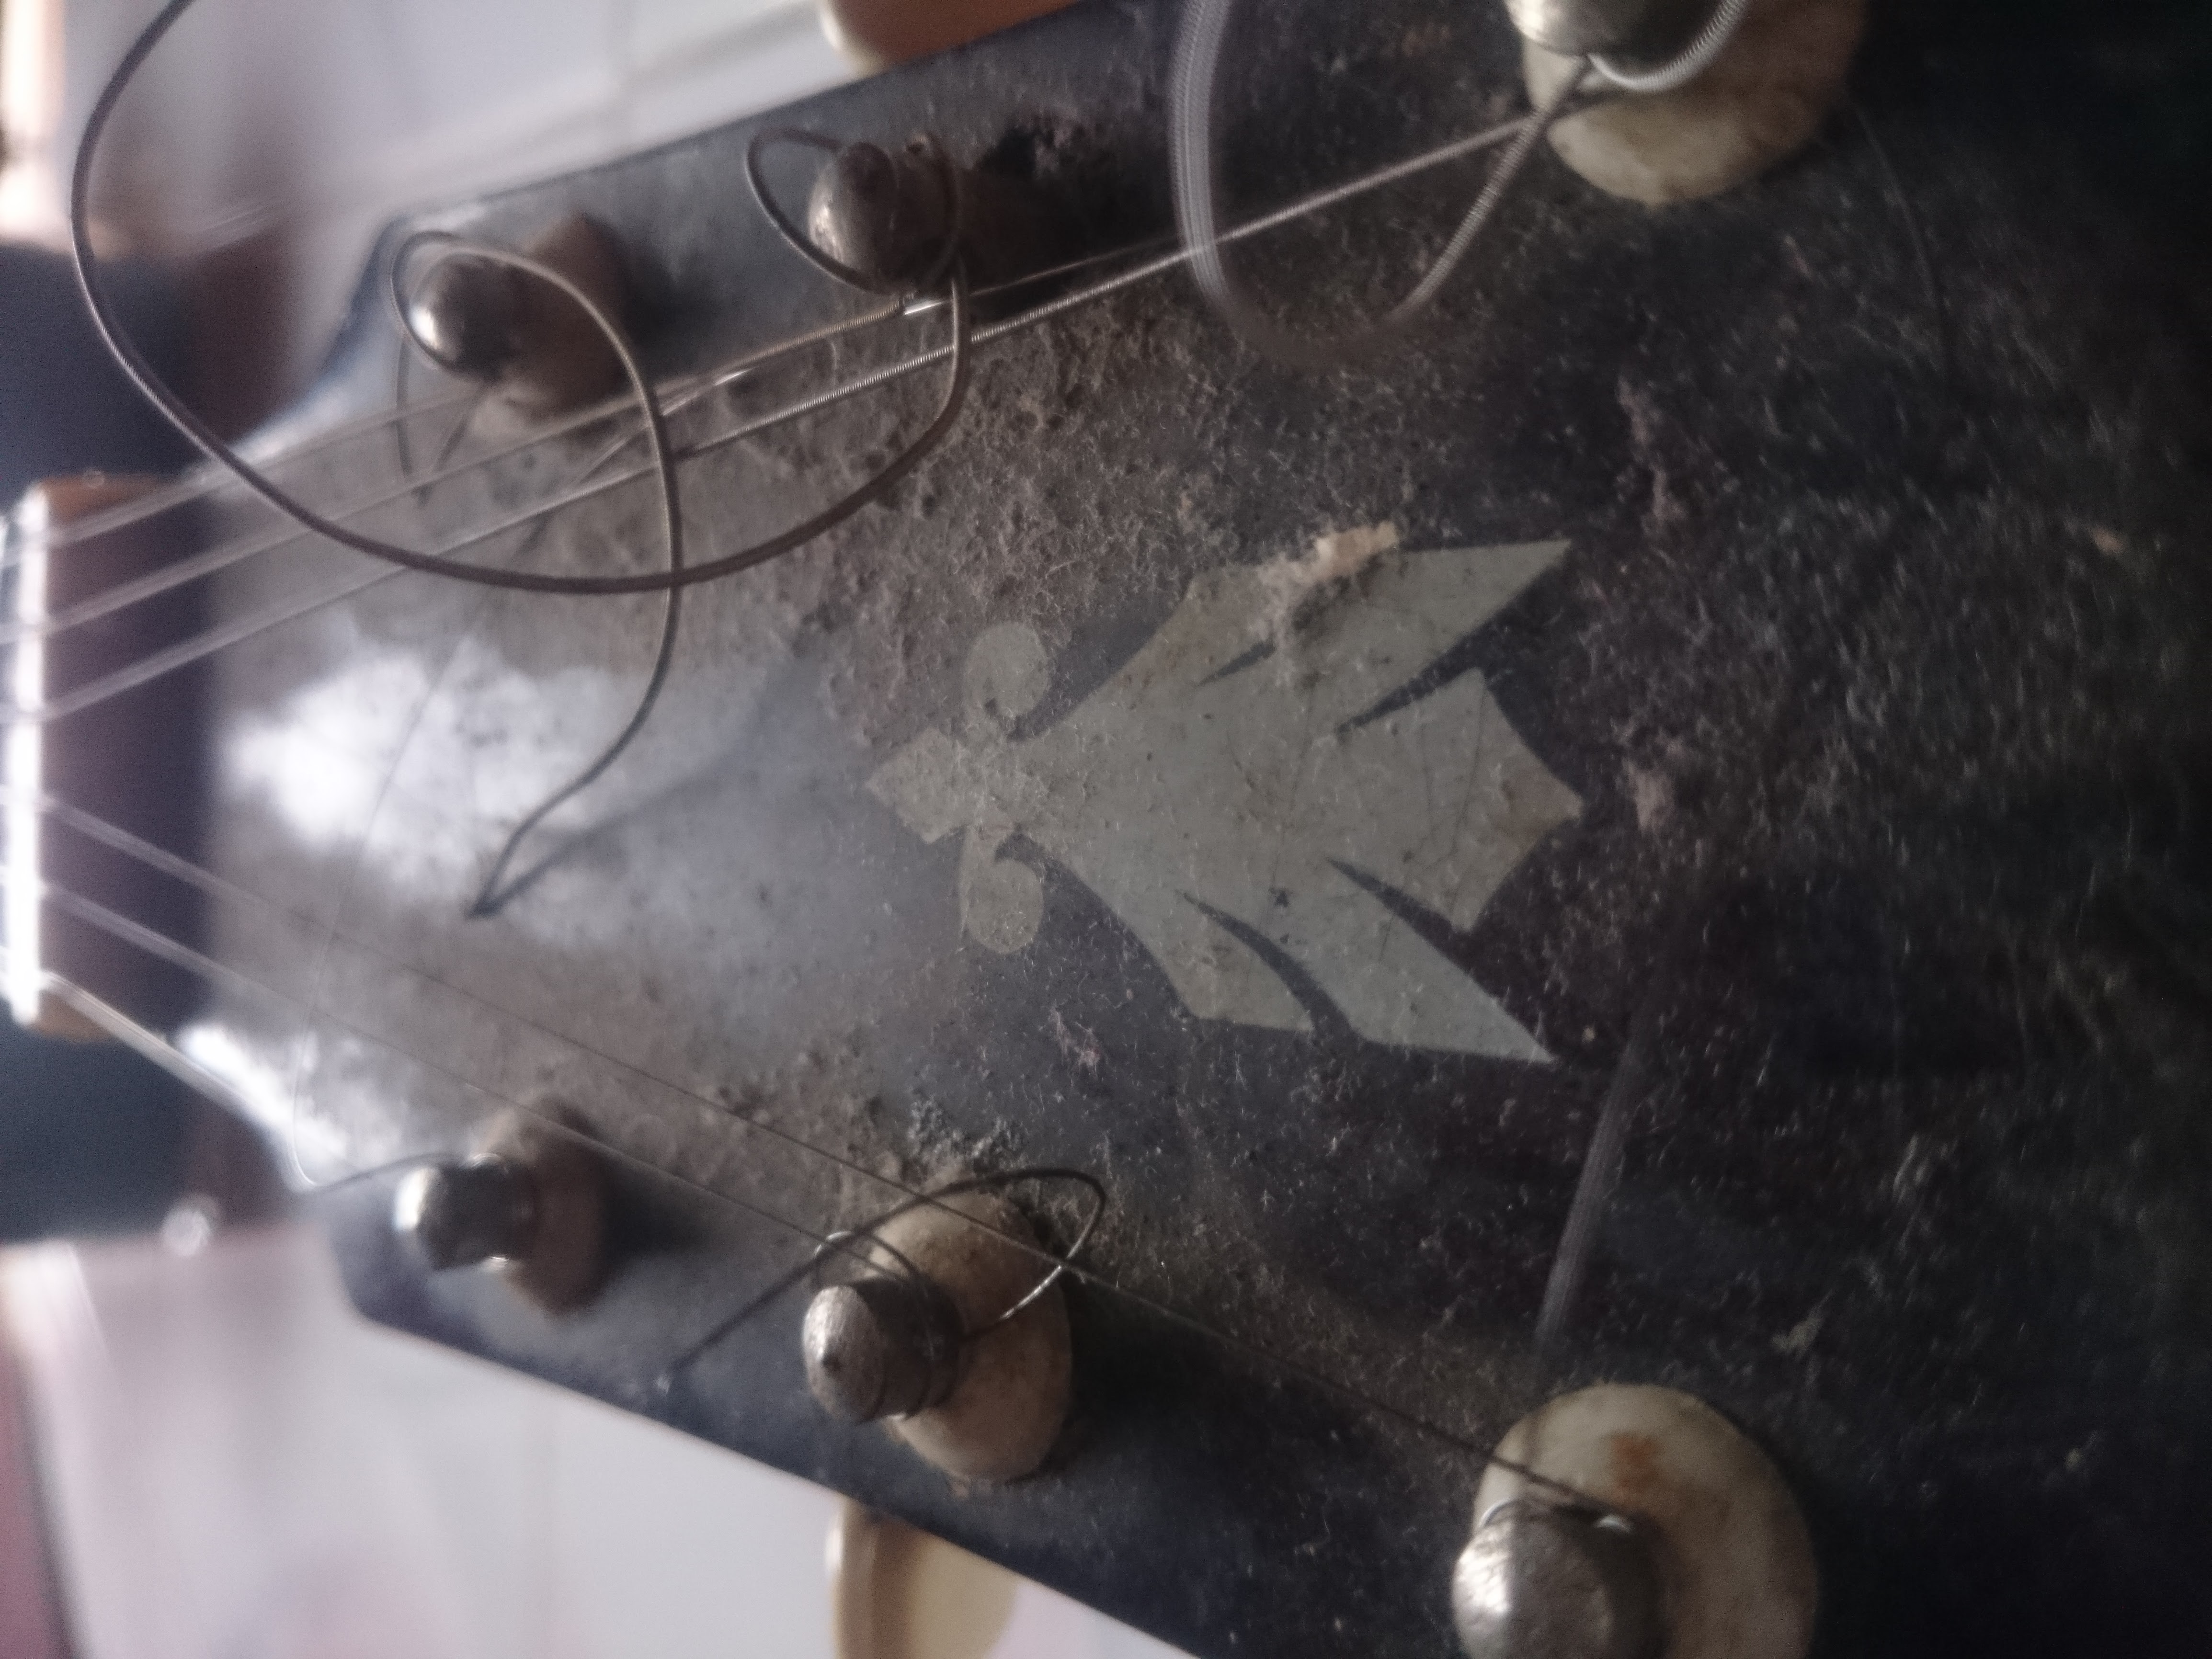 Dirty old guitar headstock photo